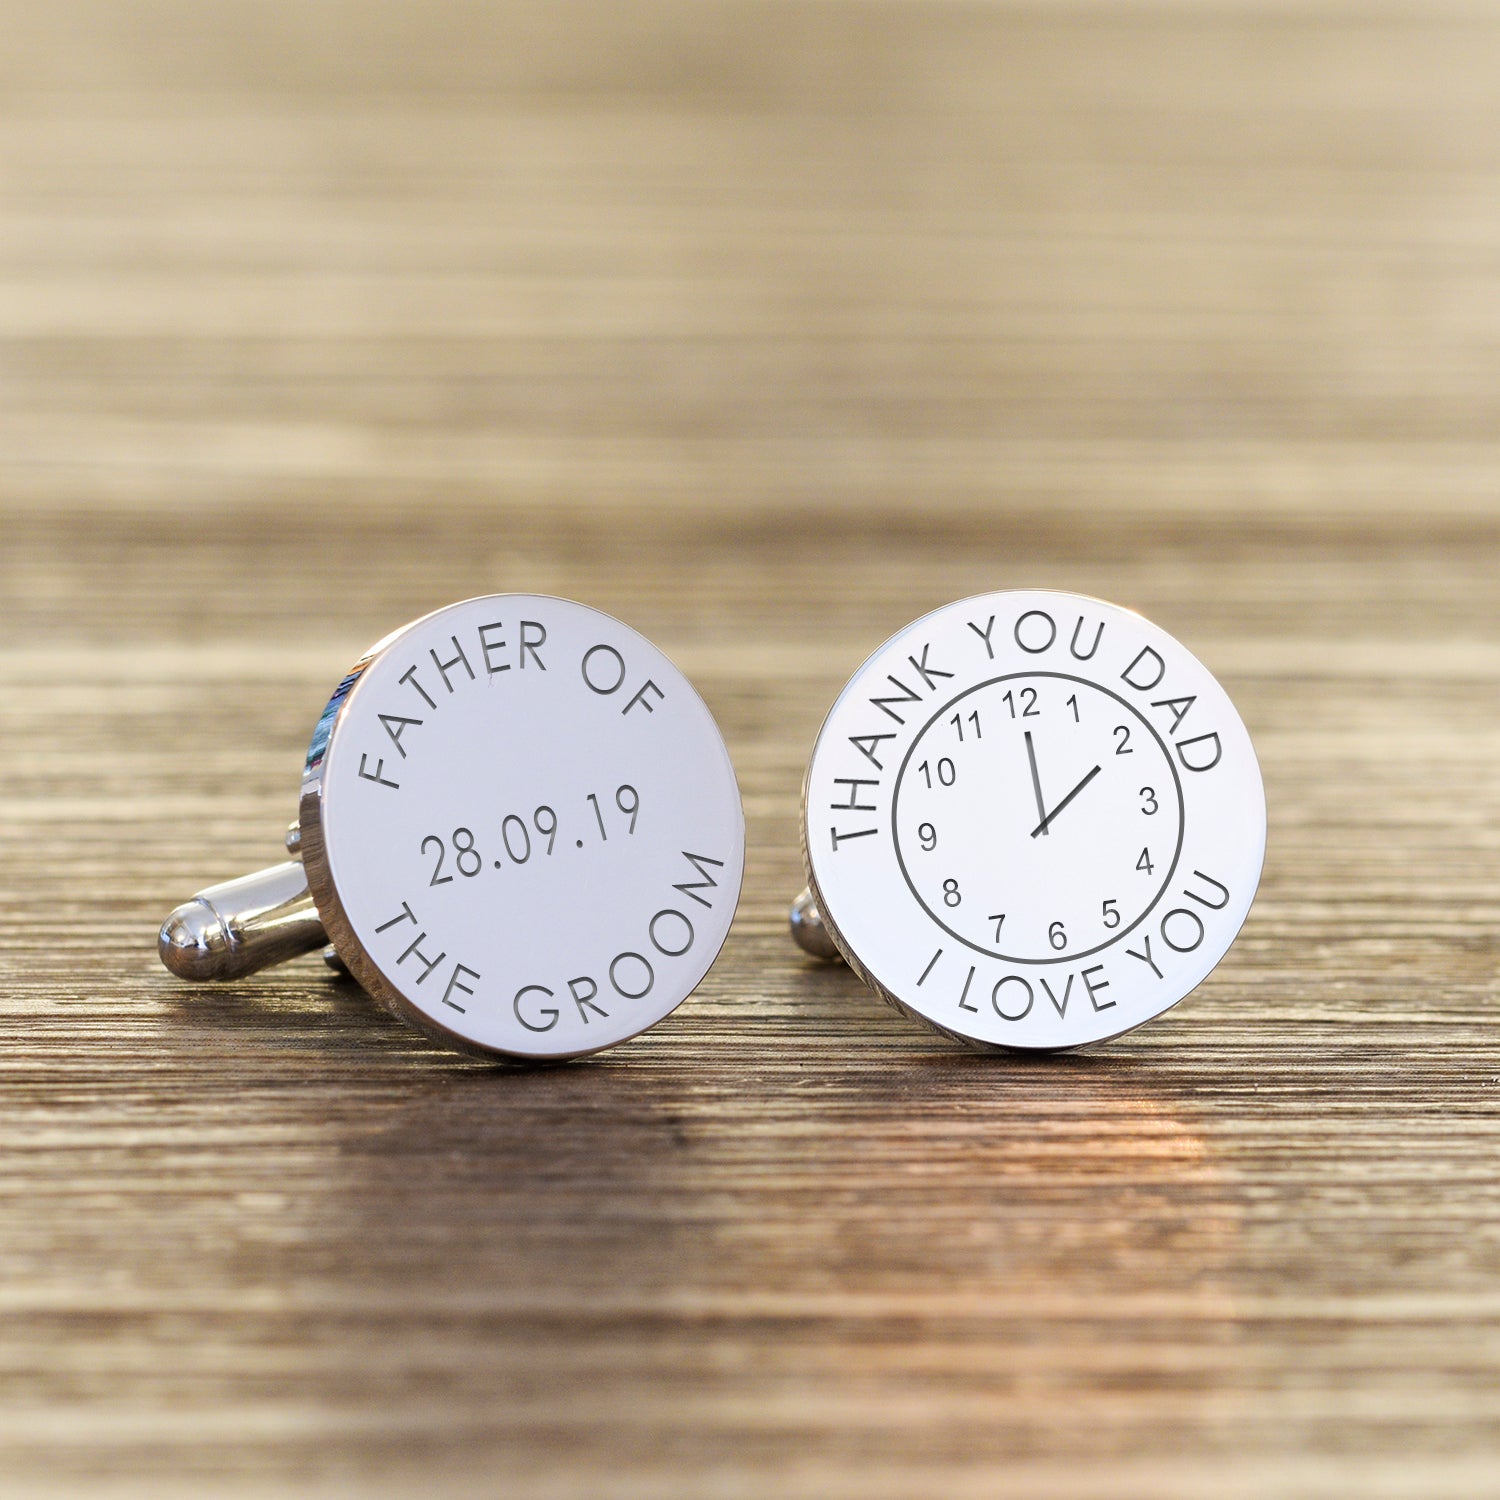 Personalised Father of the Bride/Groom Time Cufflinks